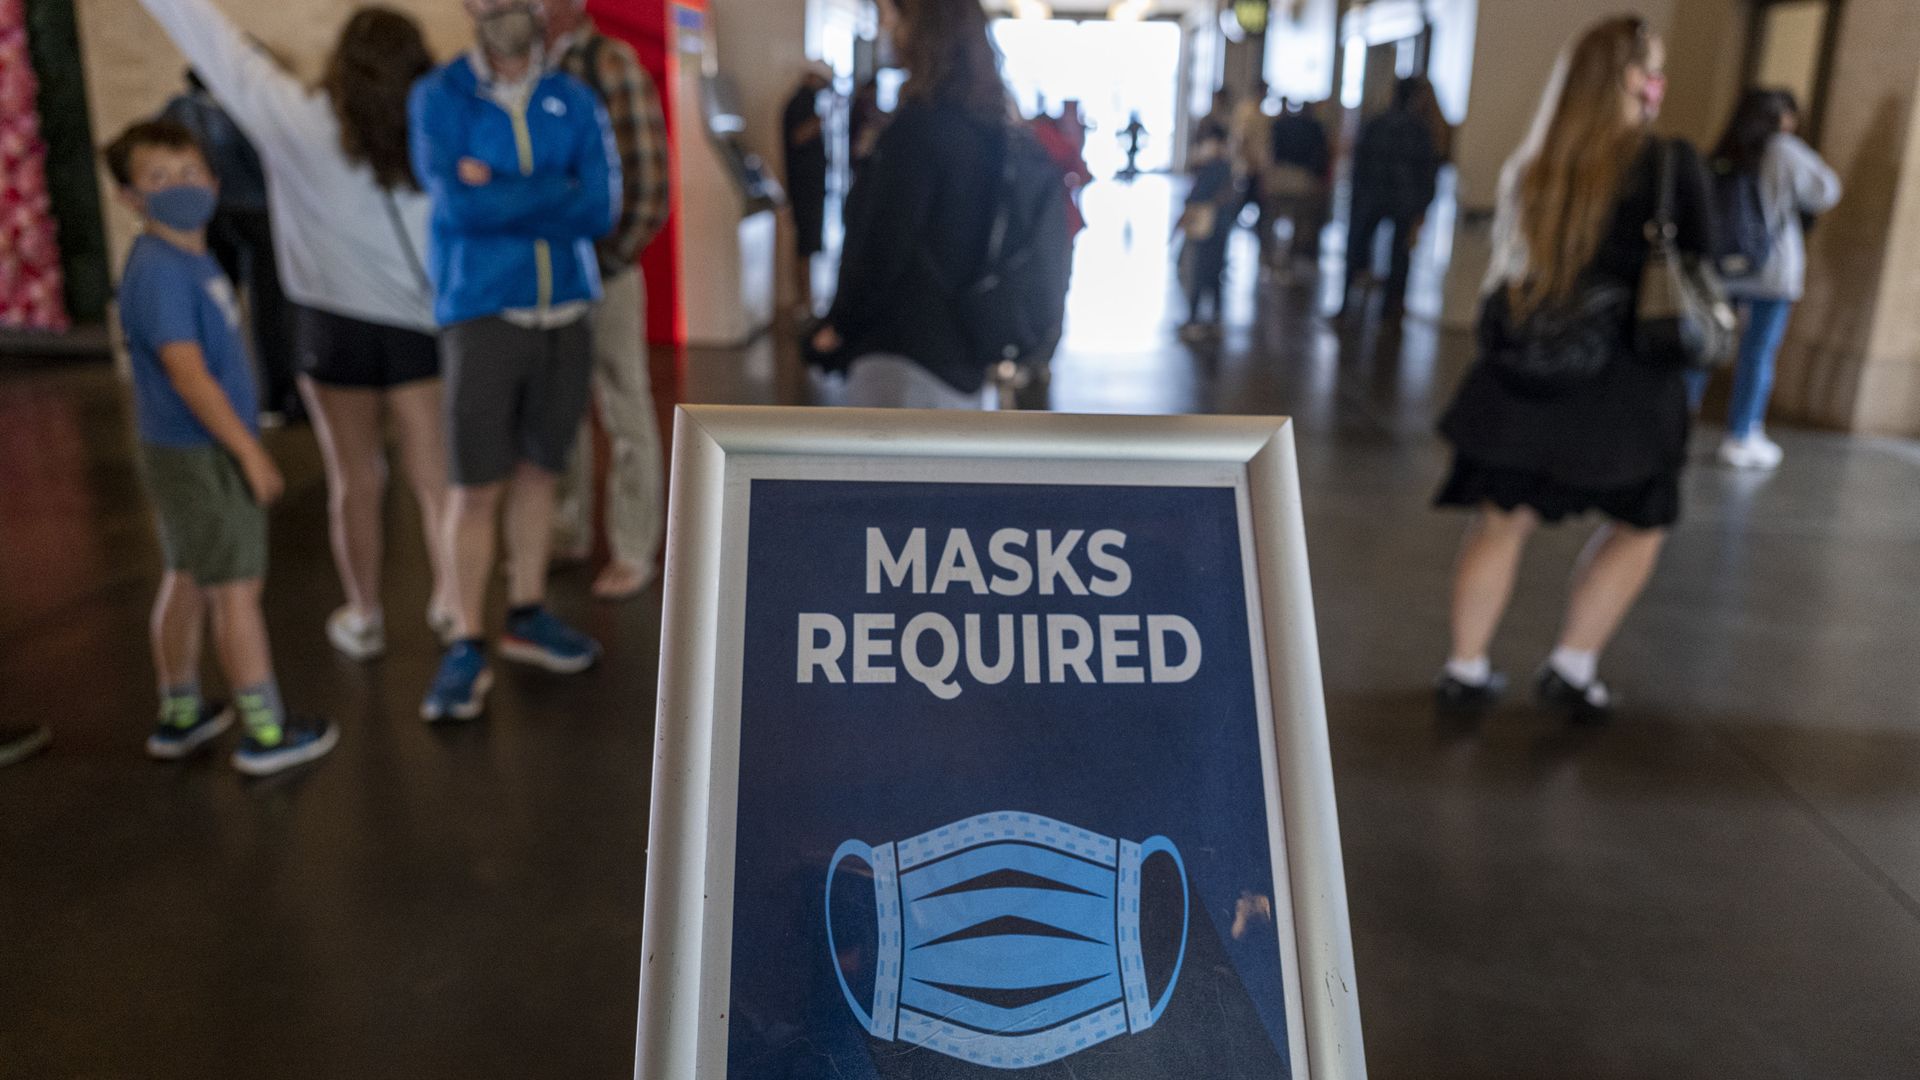 Photo of a sign that says "masks required" as people walk around in the background